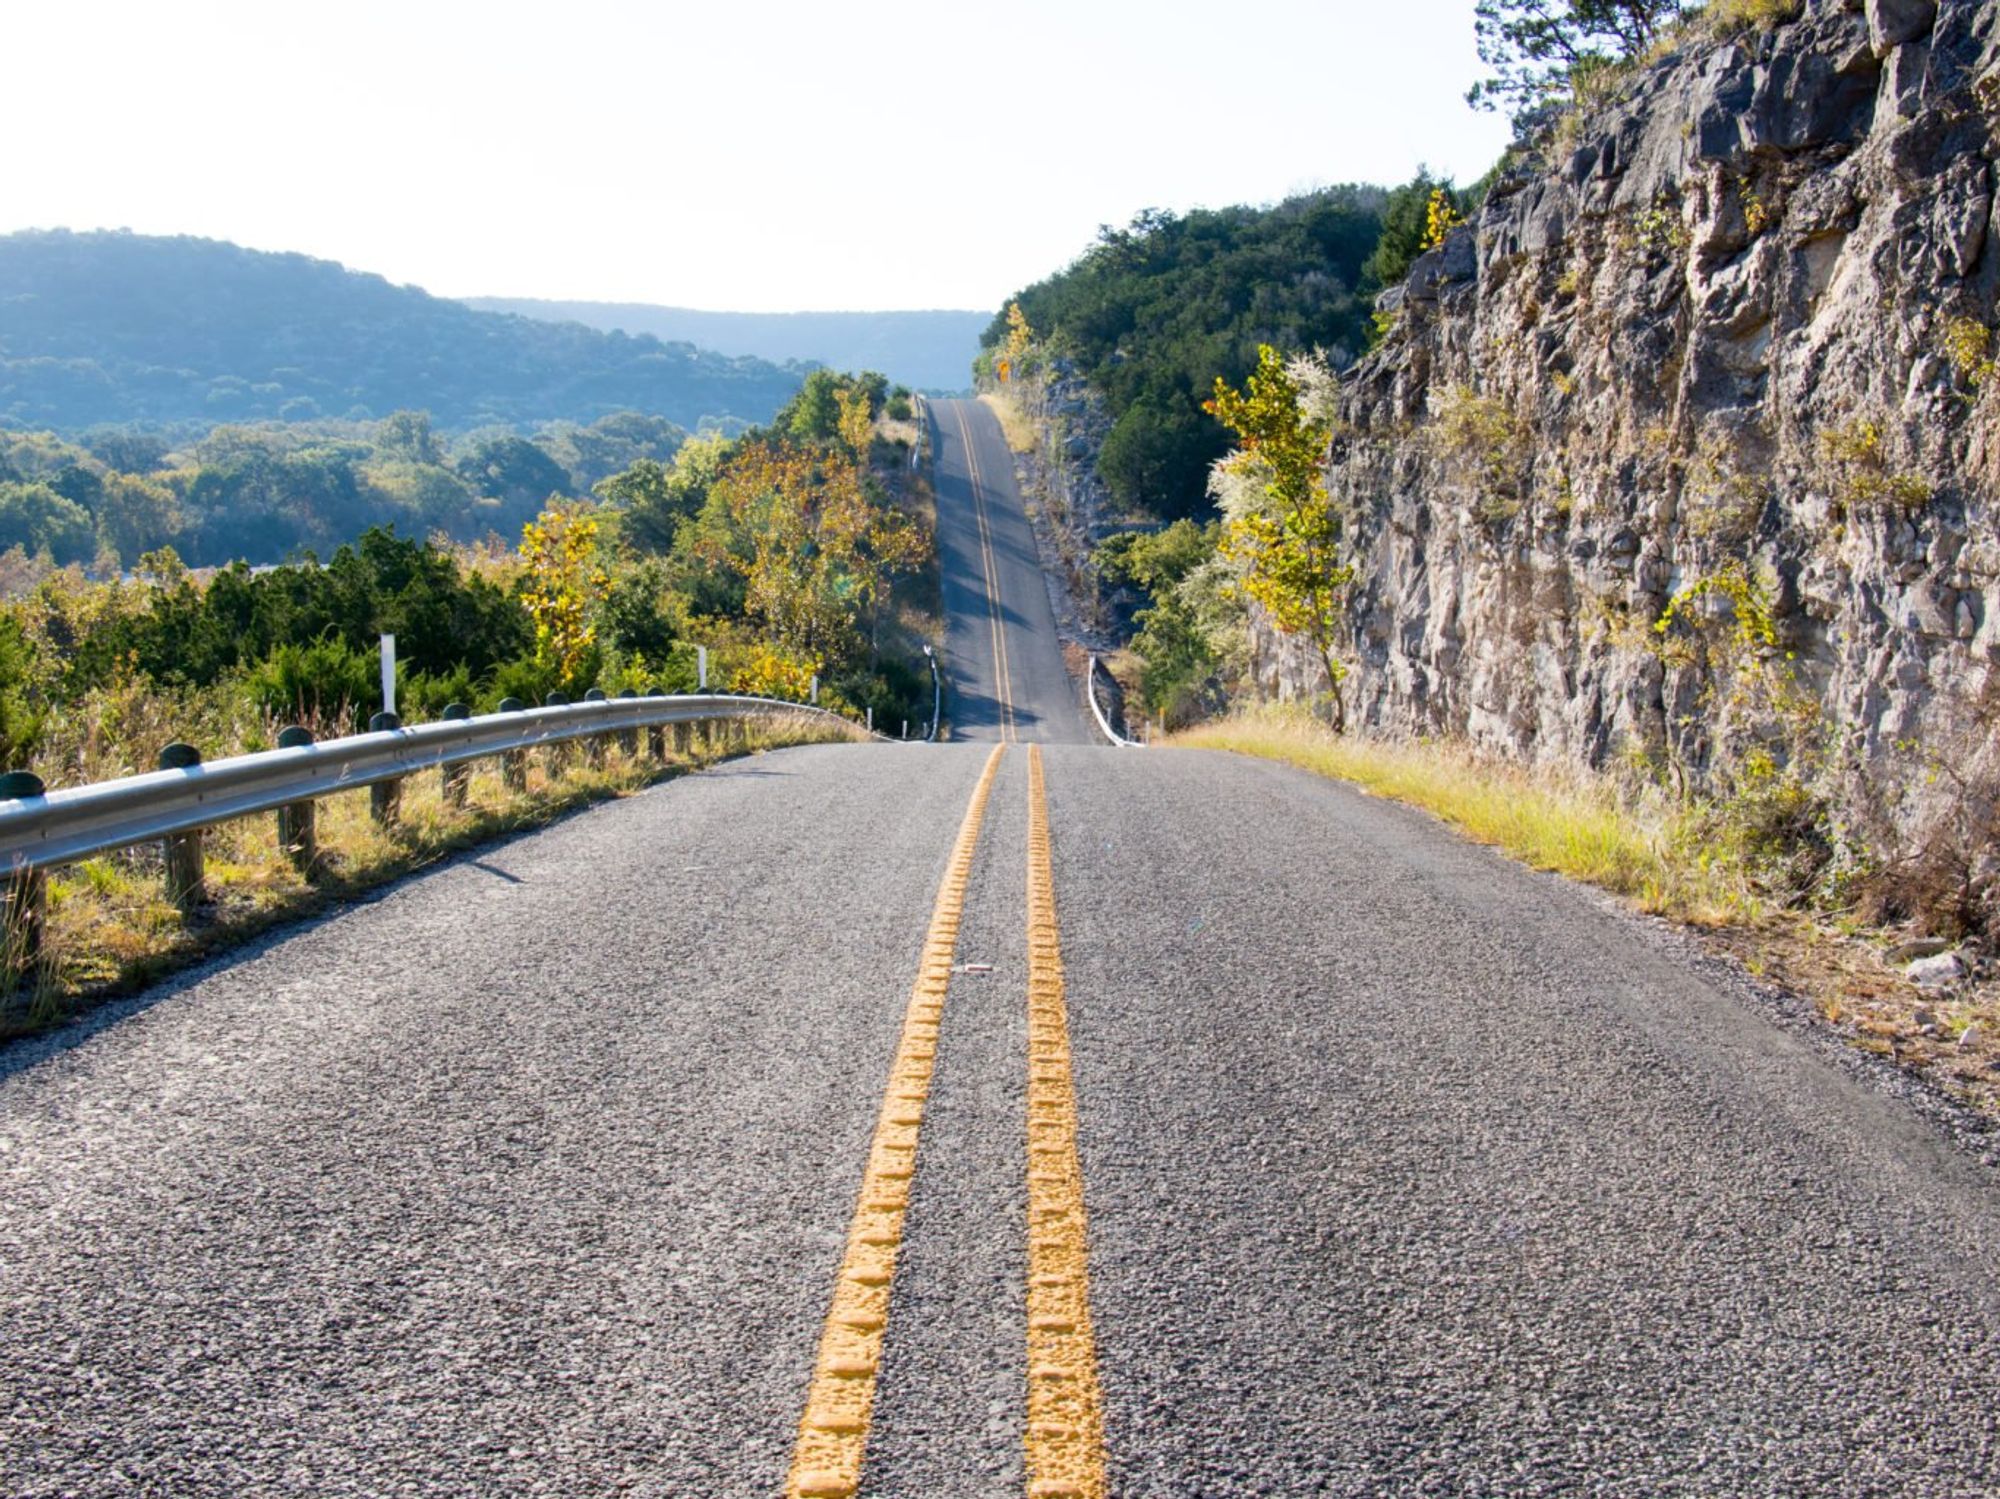 This winding Hill Country road outside Austin was voted one of the best  scenic routes in the country - CultureMap Austin